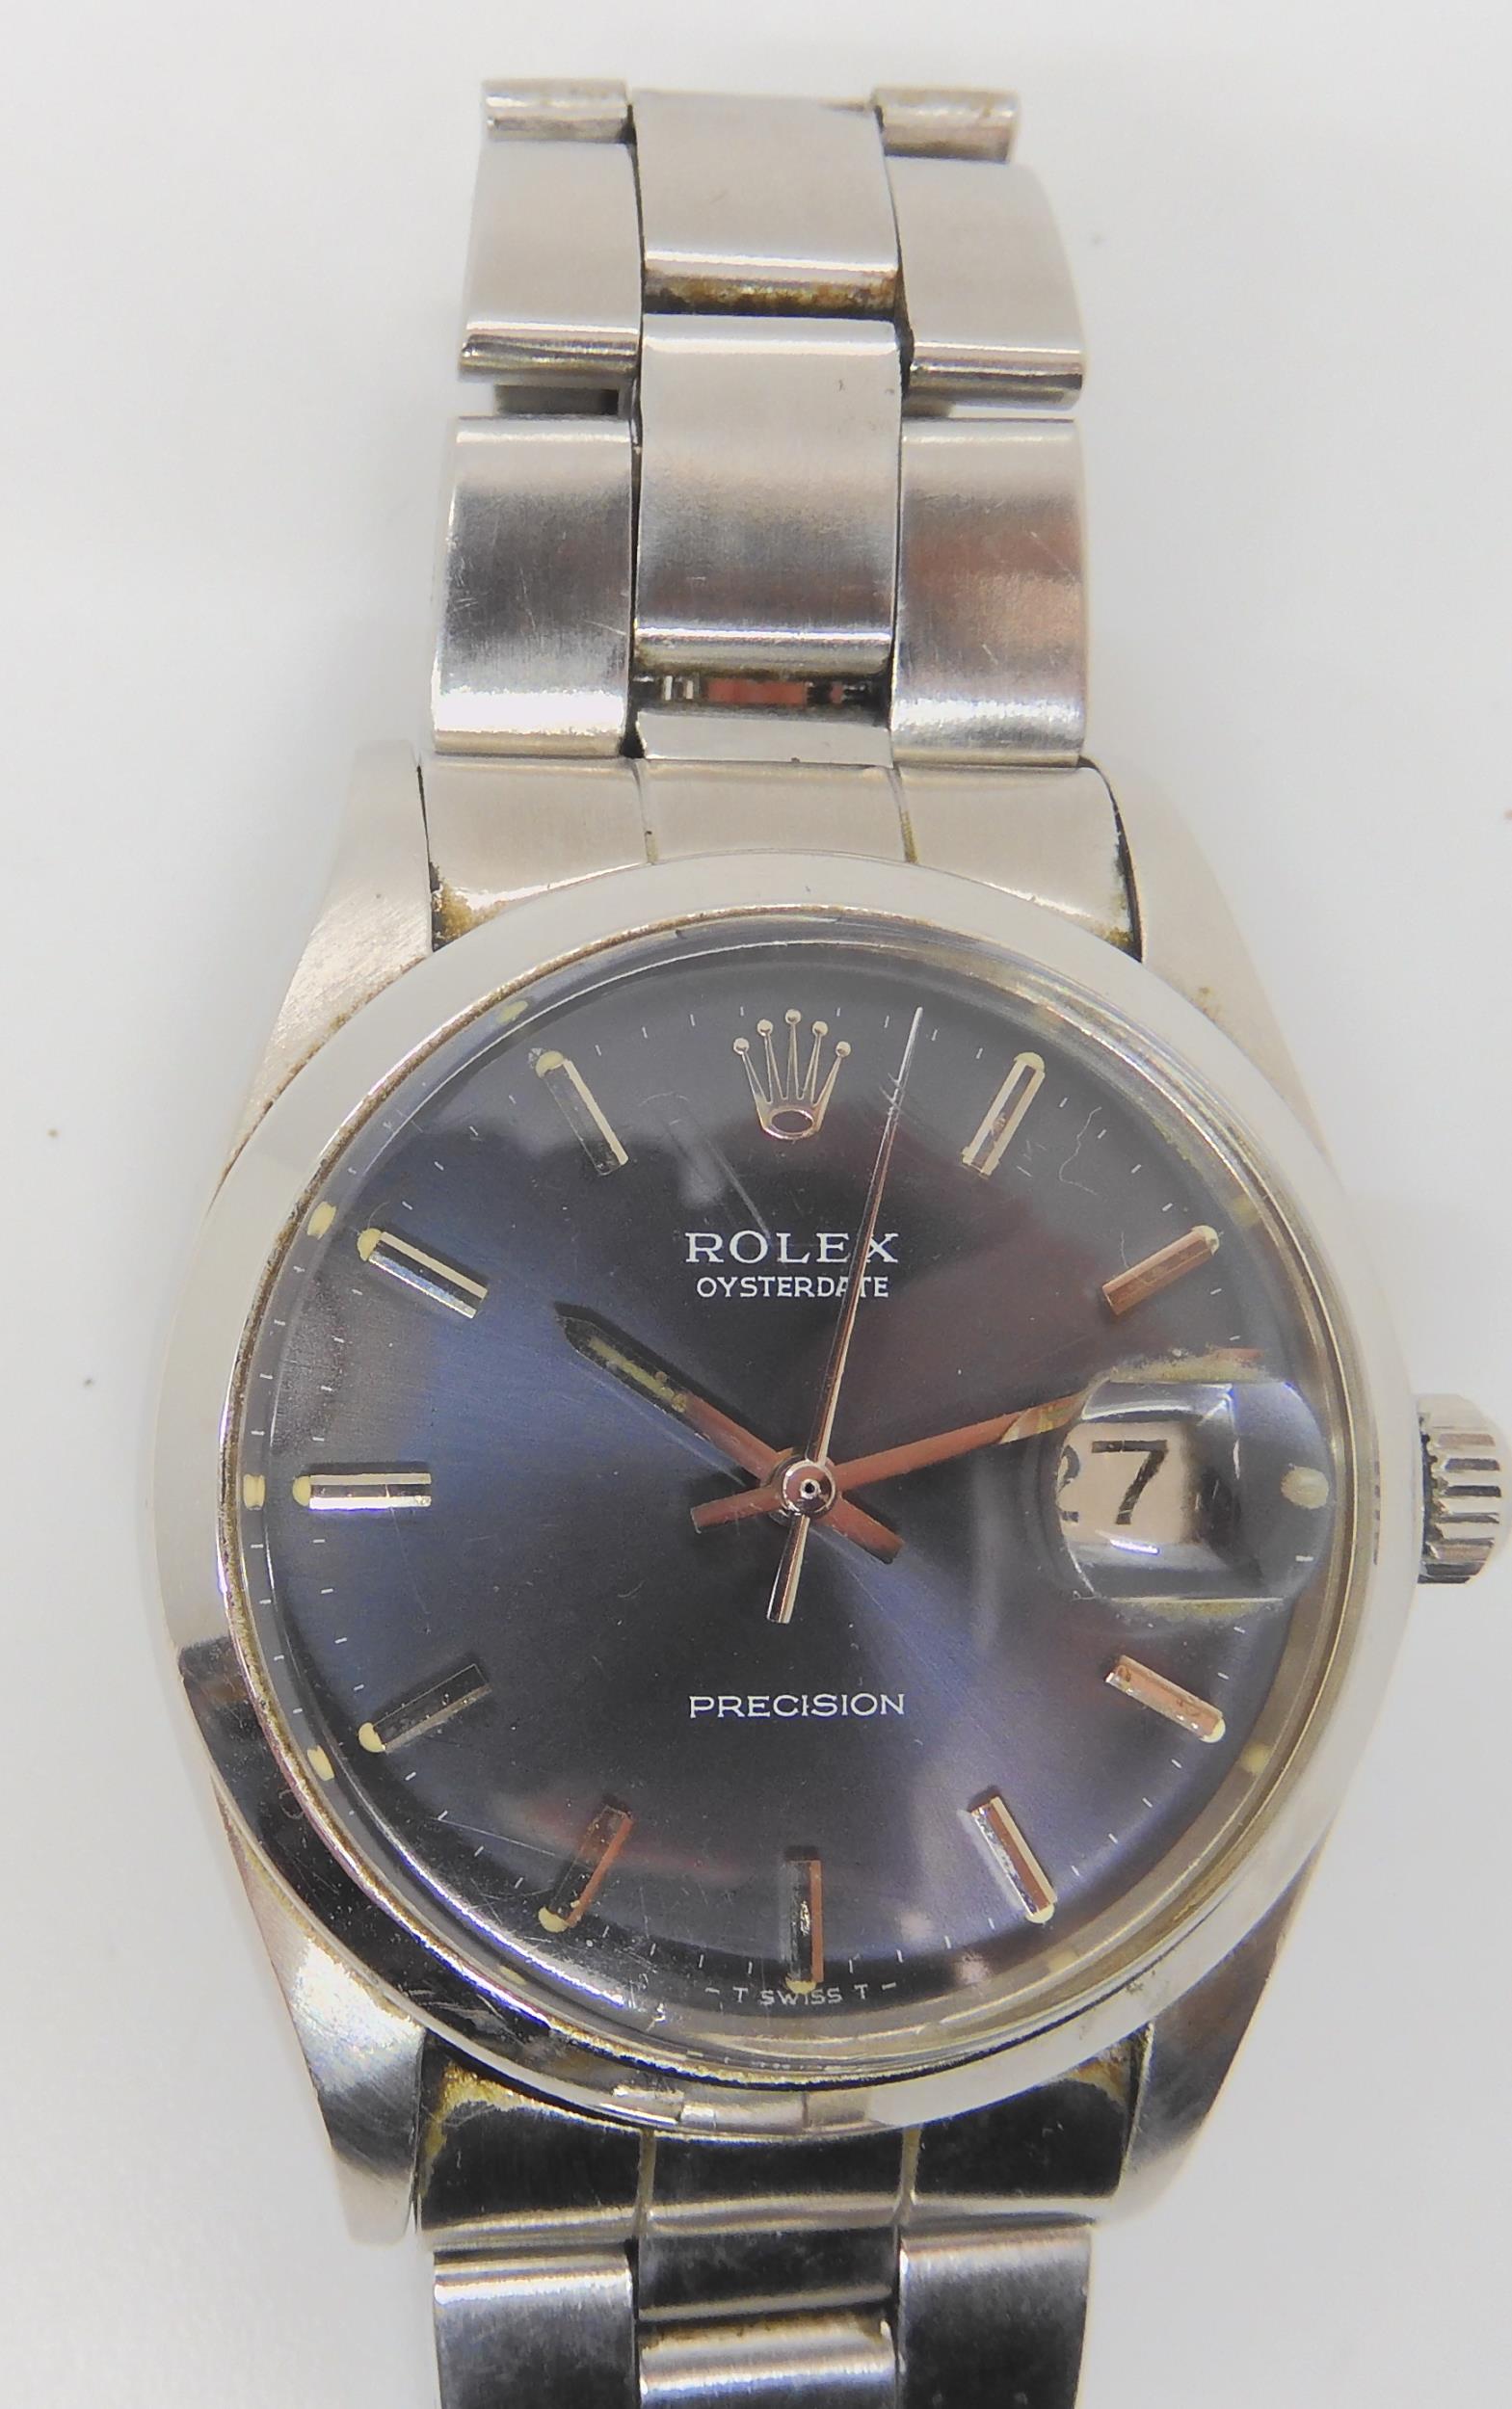 A ROLEX OYSTERDATE PRECISION with dark grey satined dial, silver coloured baton numerals, hands, and - Image 2 of 14